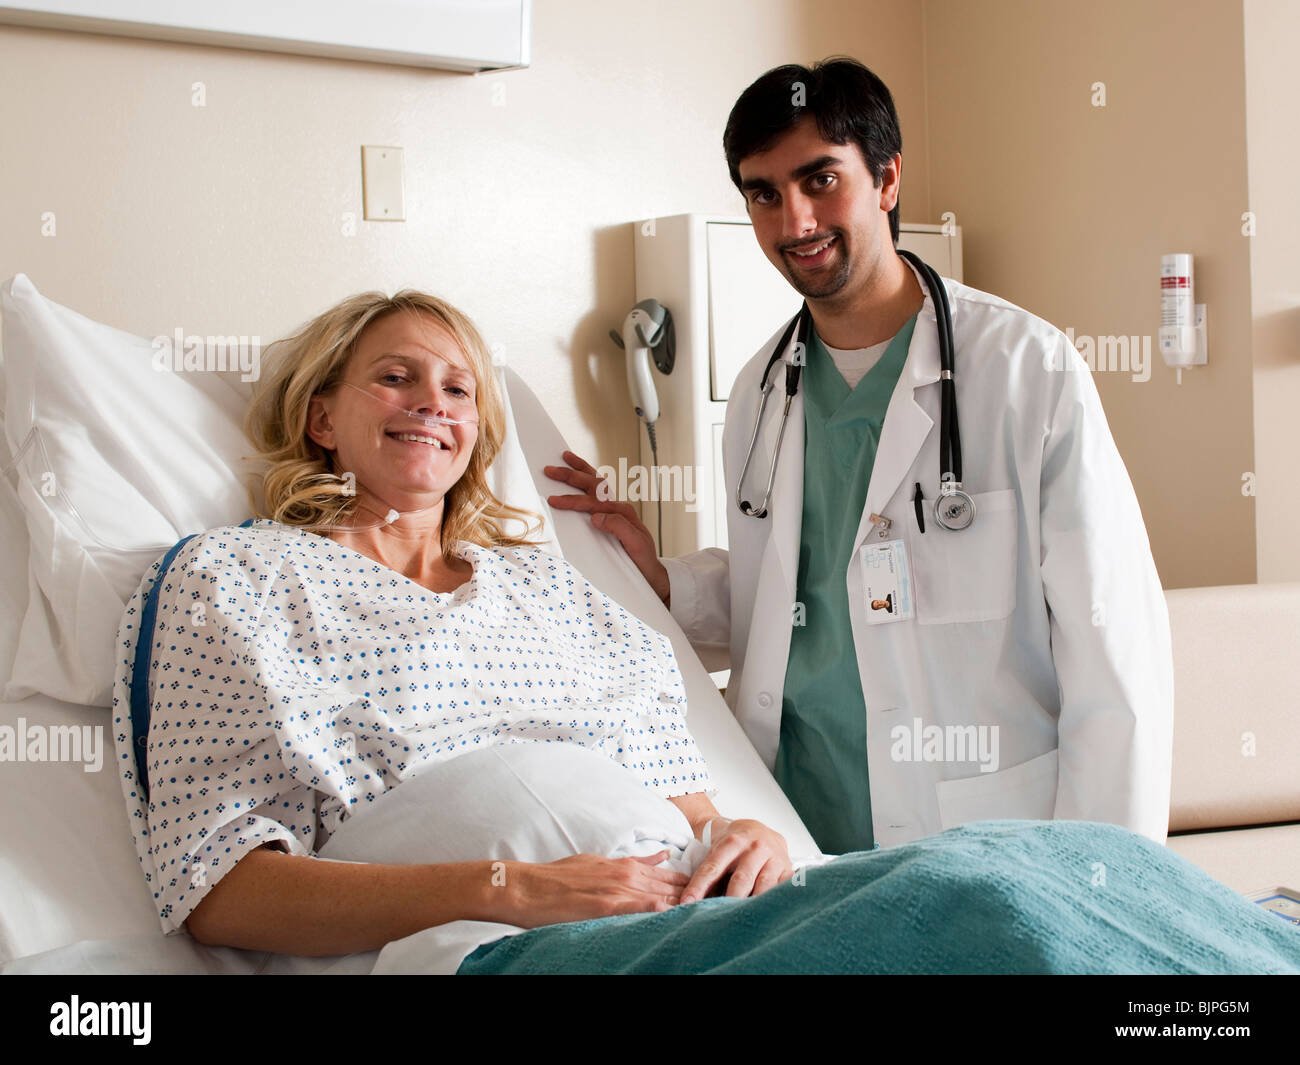 Woman in hospital bed Stock Photo